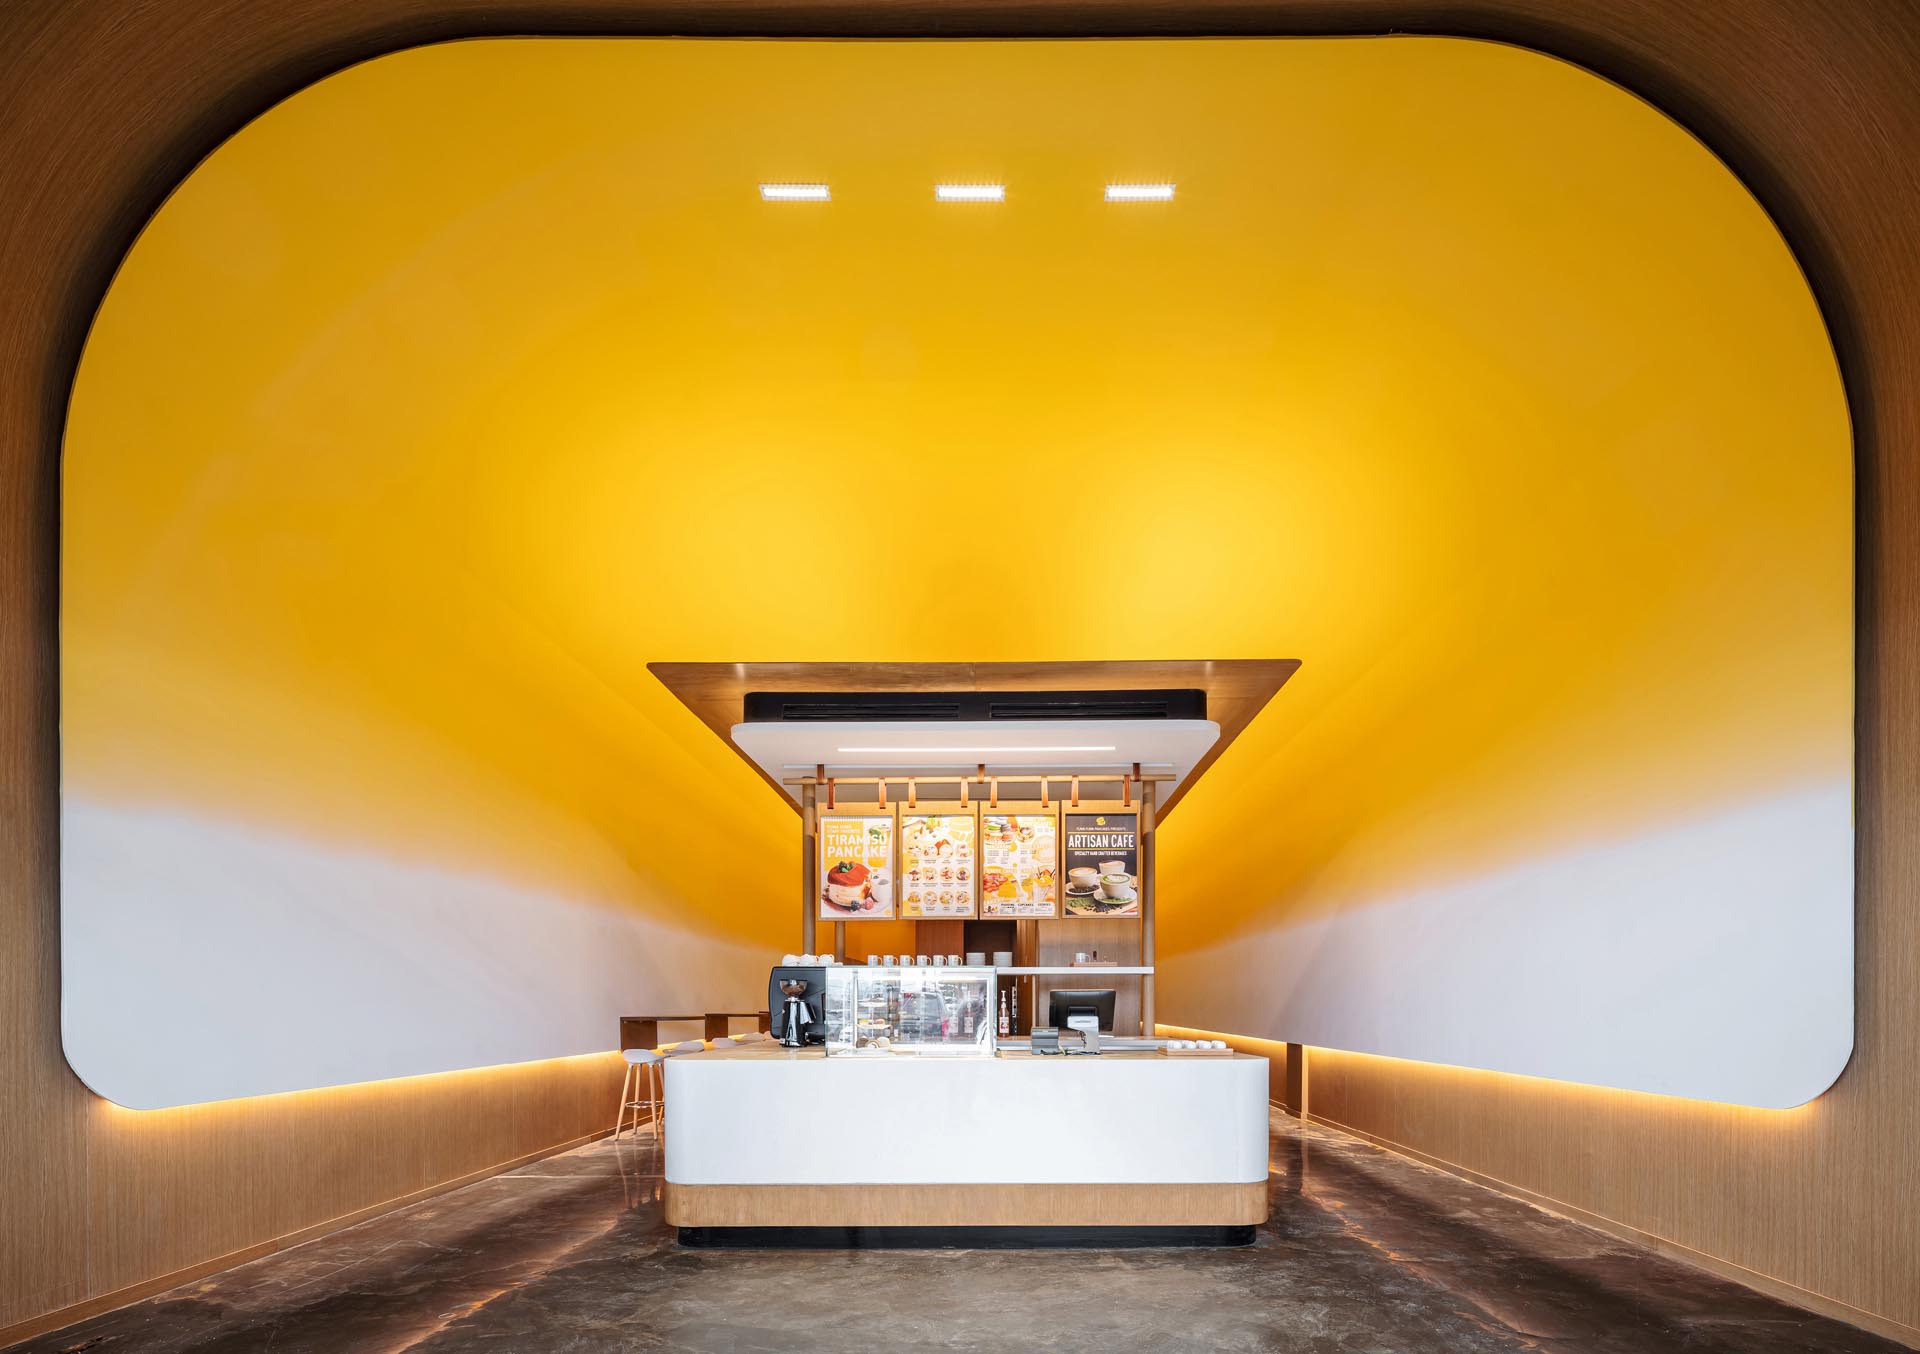 Visitors to this cafe are greeted by the soft curve and bright yellow of the high canopy. It frames the modern temple-like structure below. Light emanates from it, bringing light to all corners of the space.